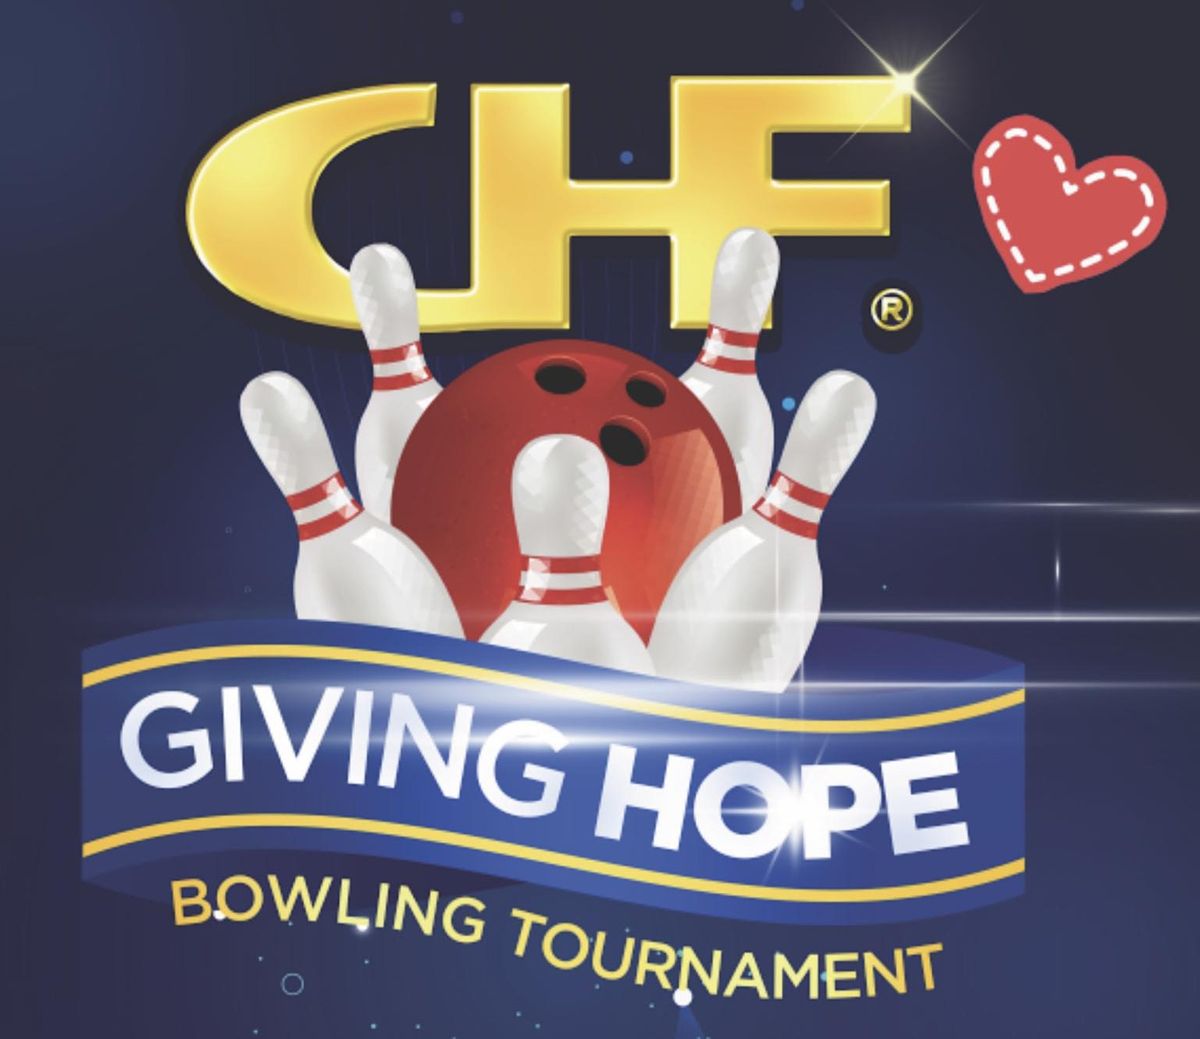 CHF Giving Hope Bowling Tournament presented by Blue Sky Couriers